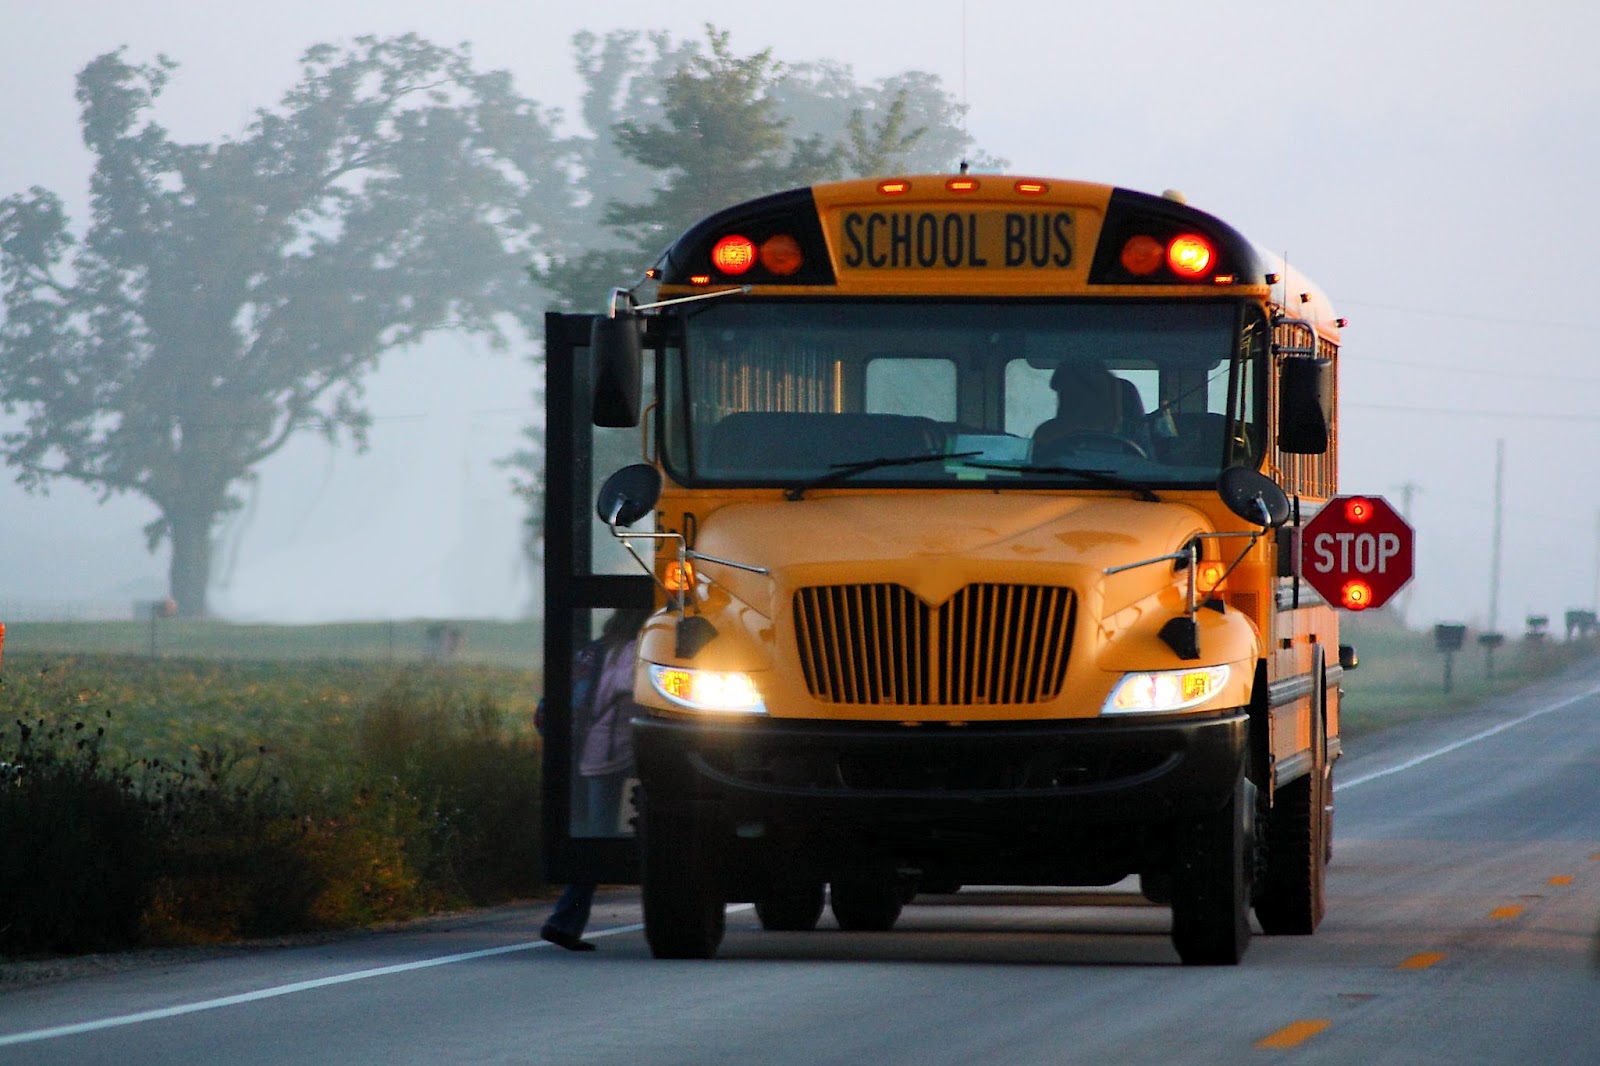 Wallpapers and pictures: School bus in the morning hd wallpaper